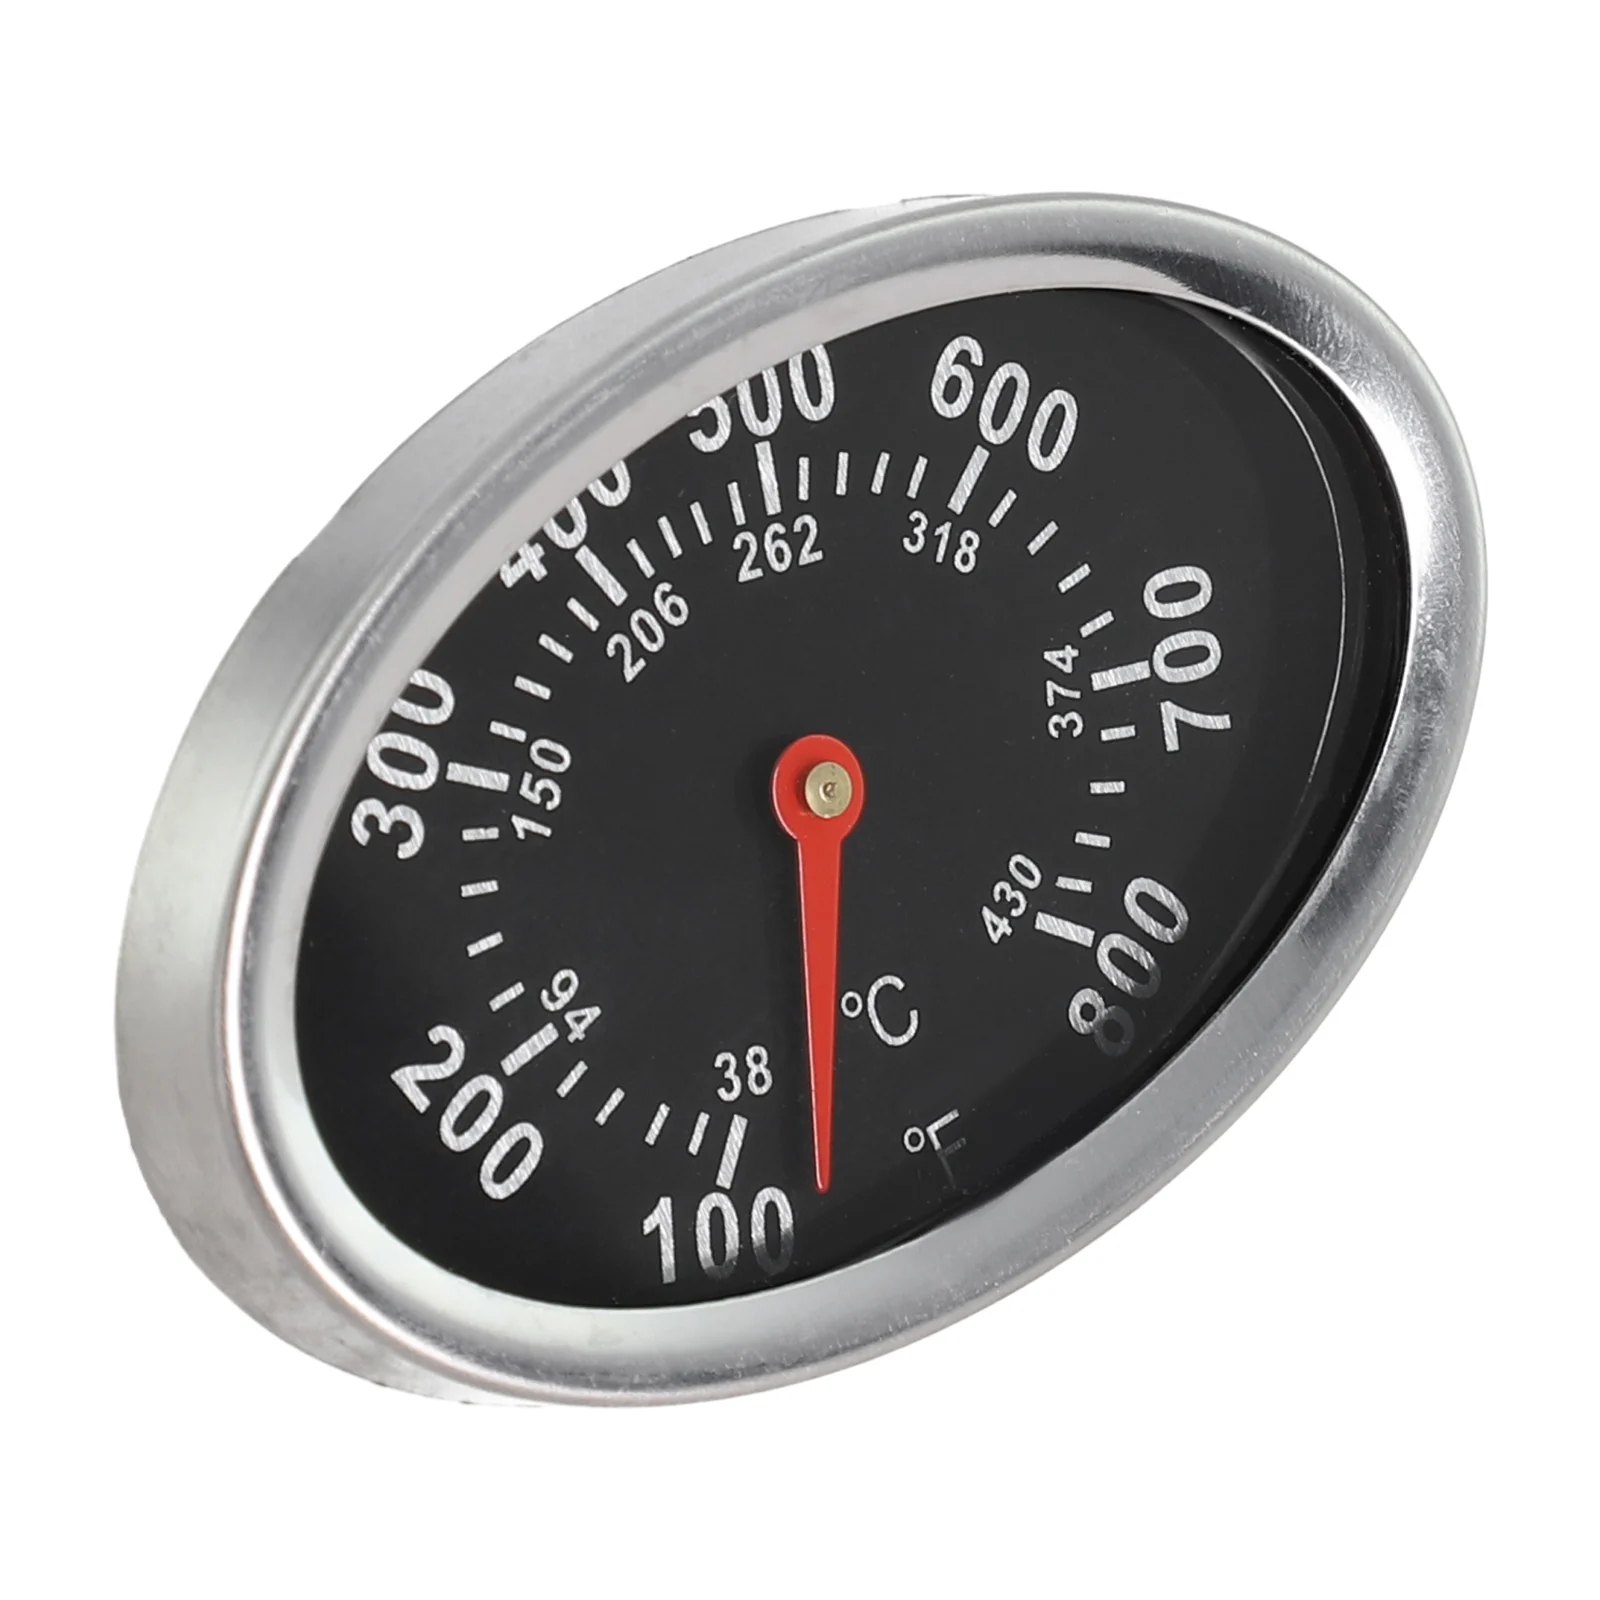 

Take Your Grilling Skills to the Next Level with the forWeber Q2000 Temperature Gauge Accurate and Easy to Use